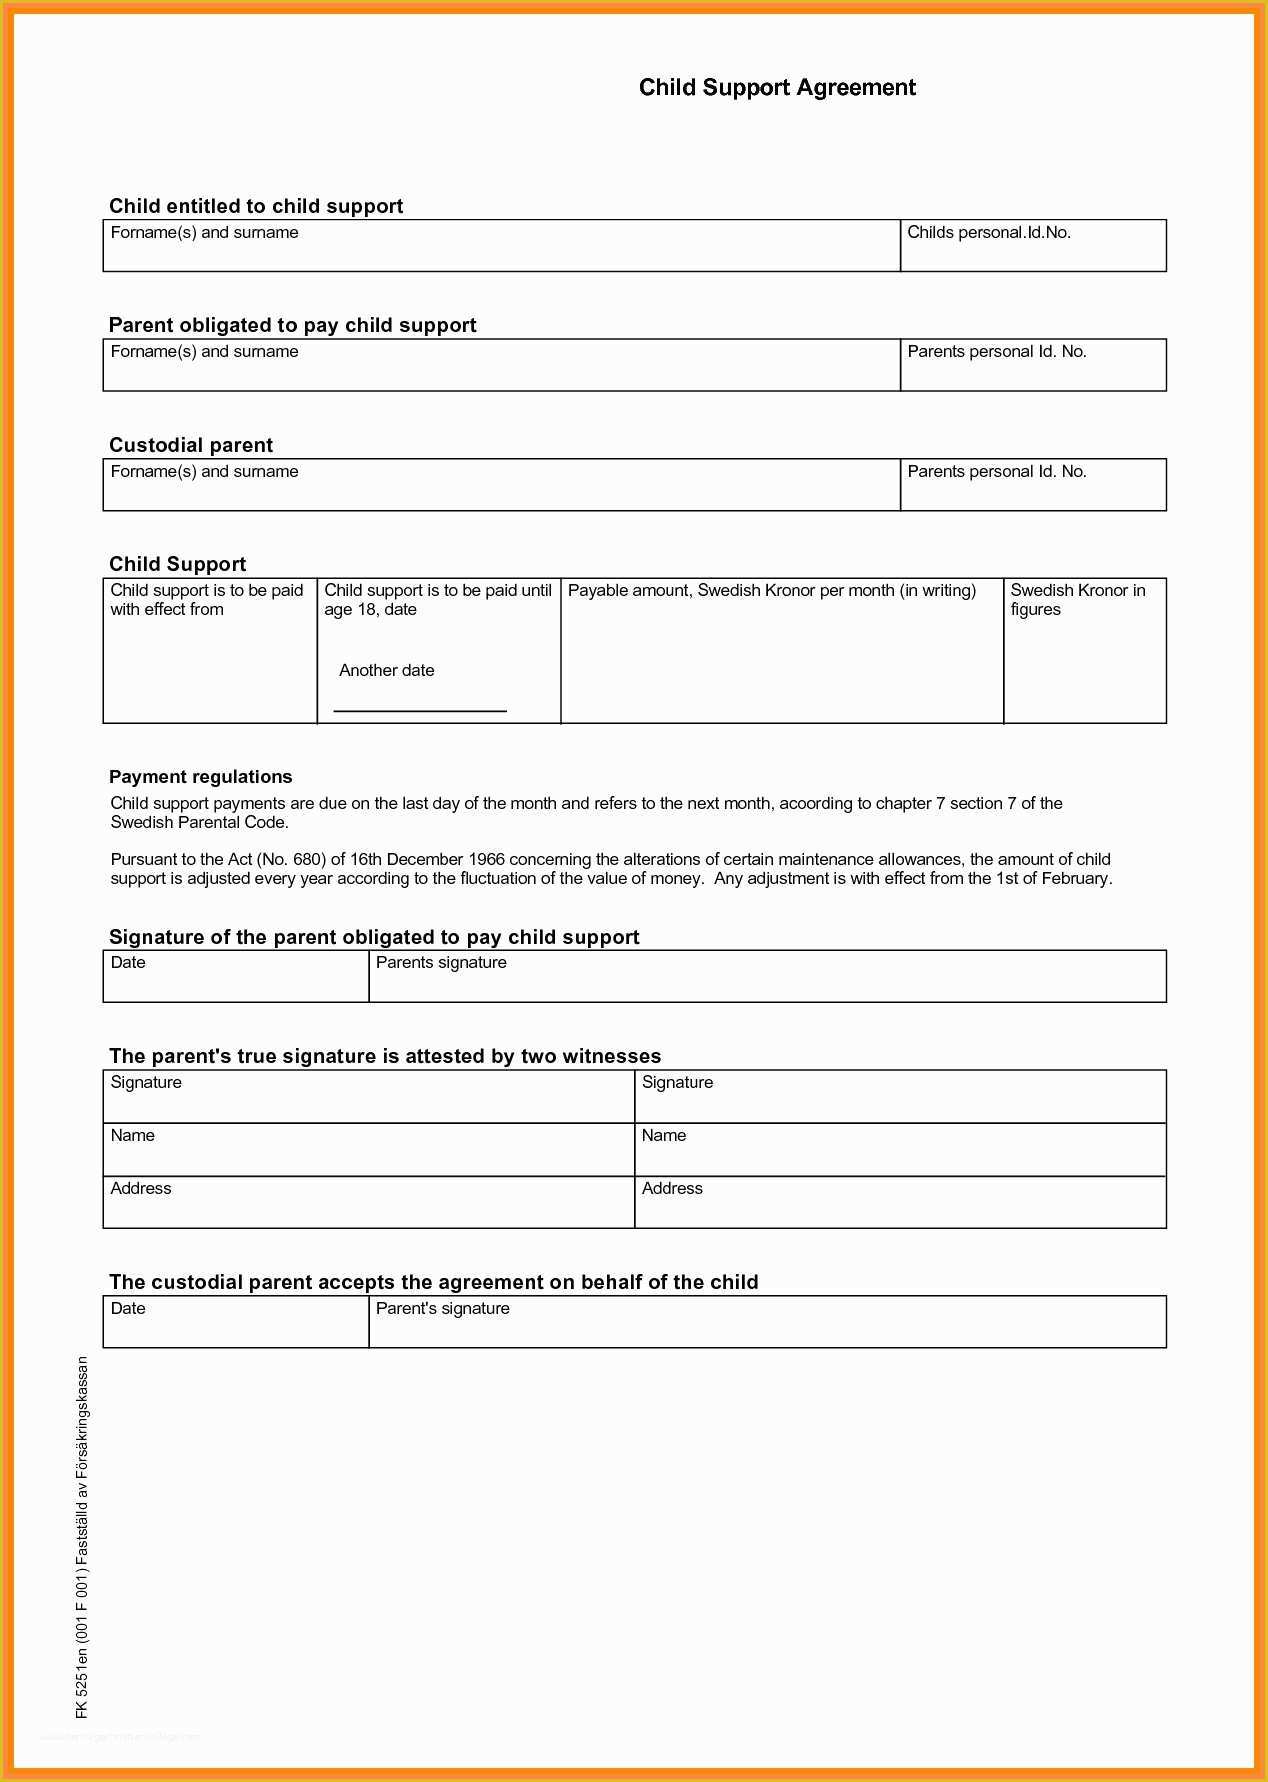 Child Support Agreement Template Free Download Of Child Support Letter Agreement Template Download